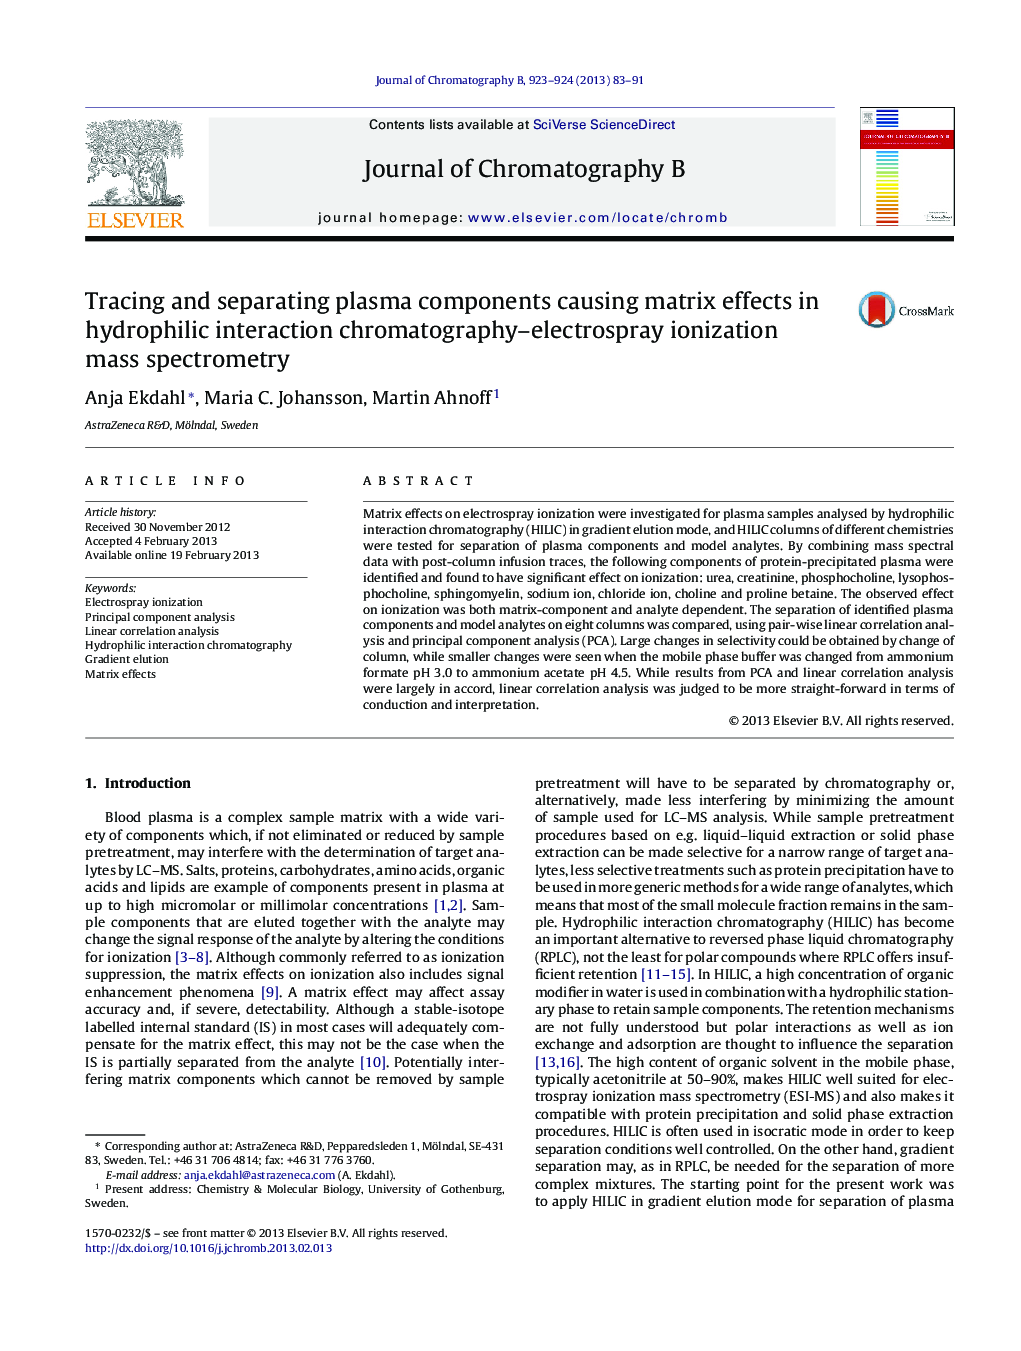 Tracing and separating plasma components causing matrix effects in hydrophilic interaction chromatography–electrospray ionization mass spectrometry